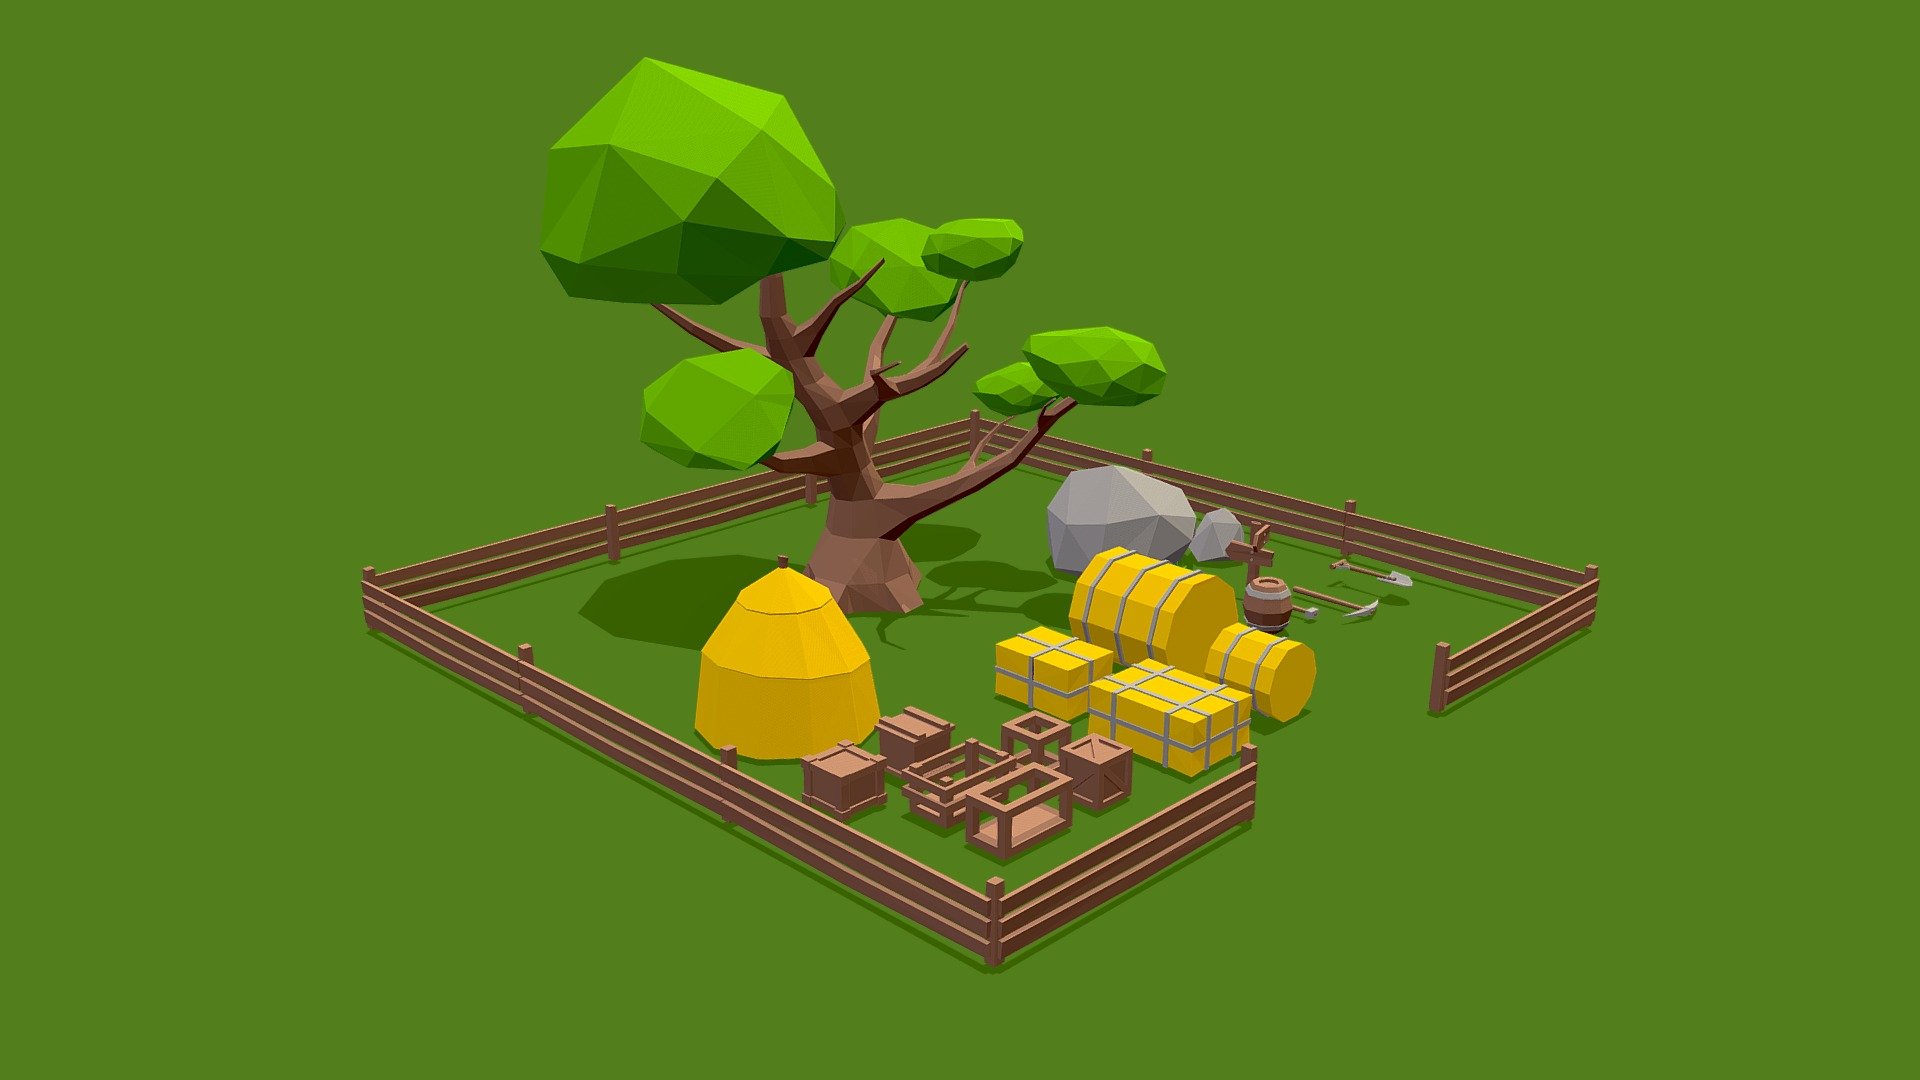 Small asset, easy to change colorssmall asset, easy to change colors - Low poly farm asset - Download Free 3D model by rakutin 3d model